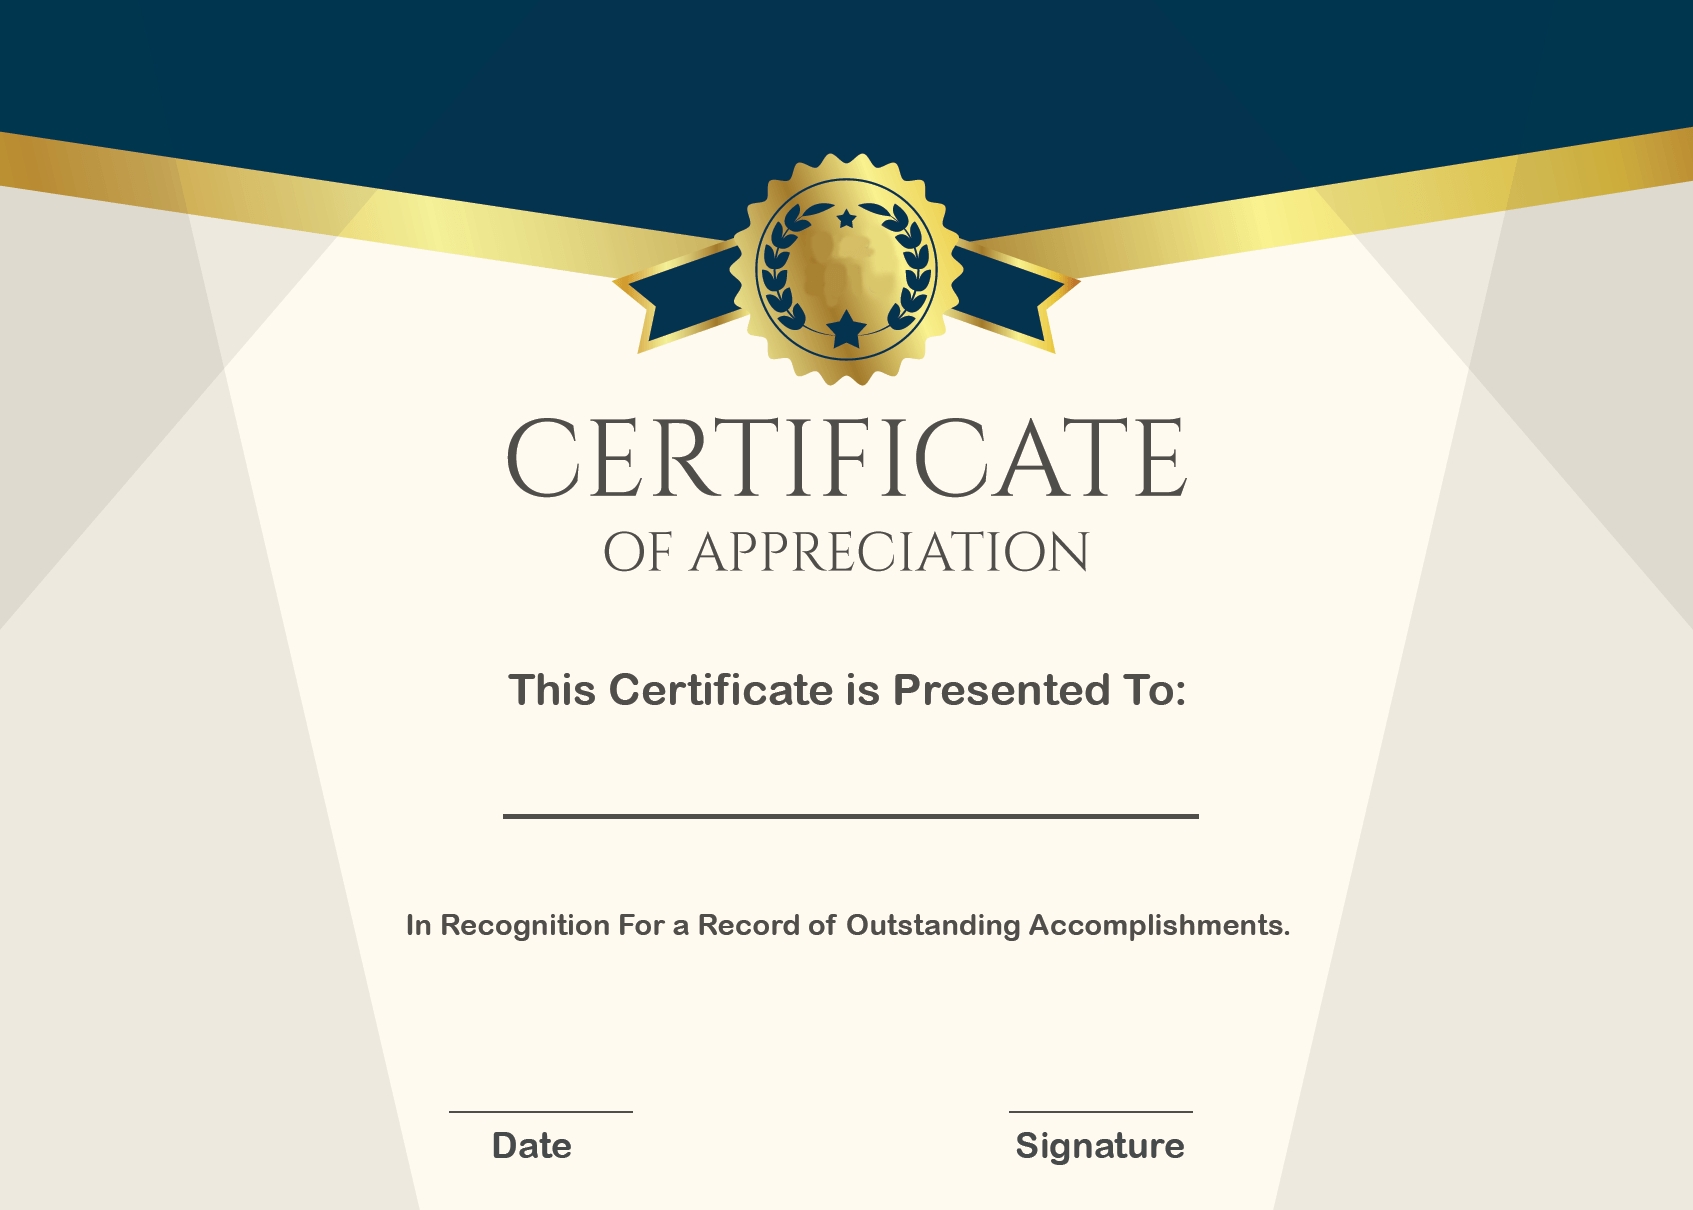 7 Sample Format Of Certificate Of Appreciation Template HowToWiki